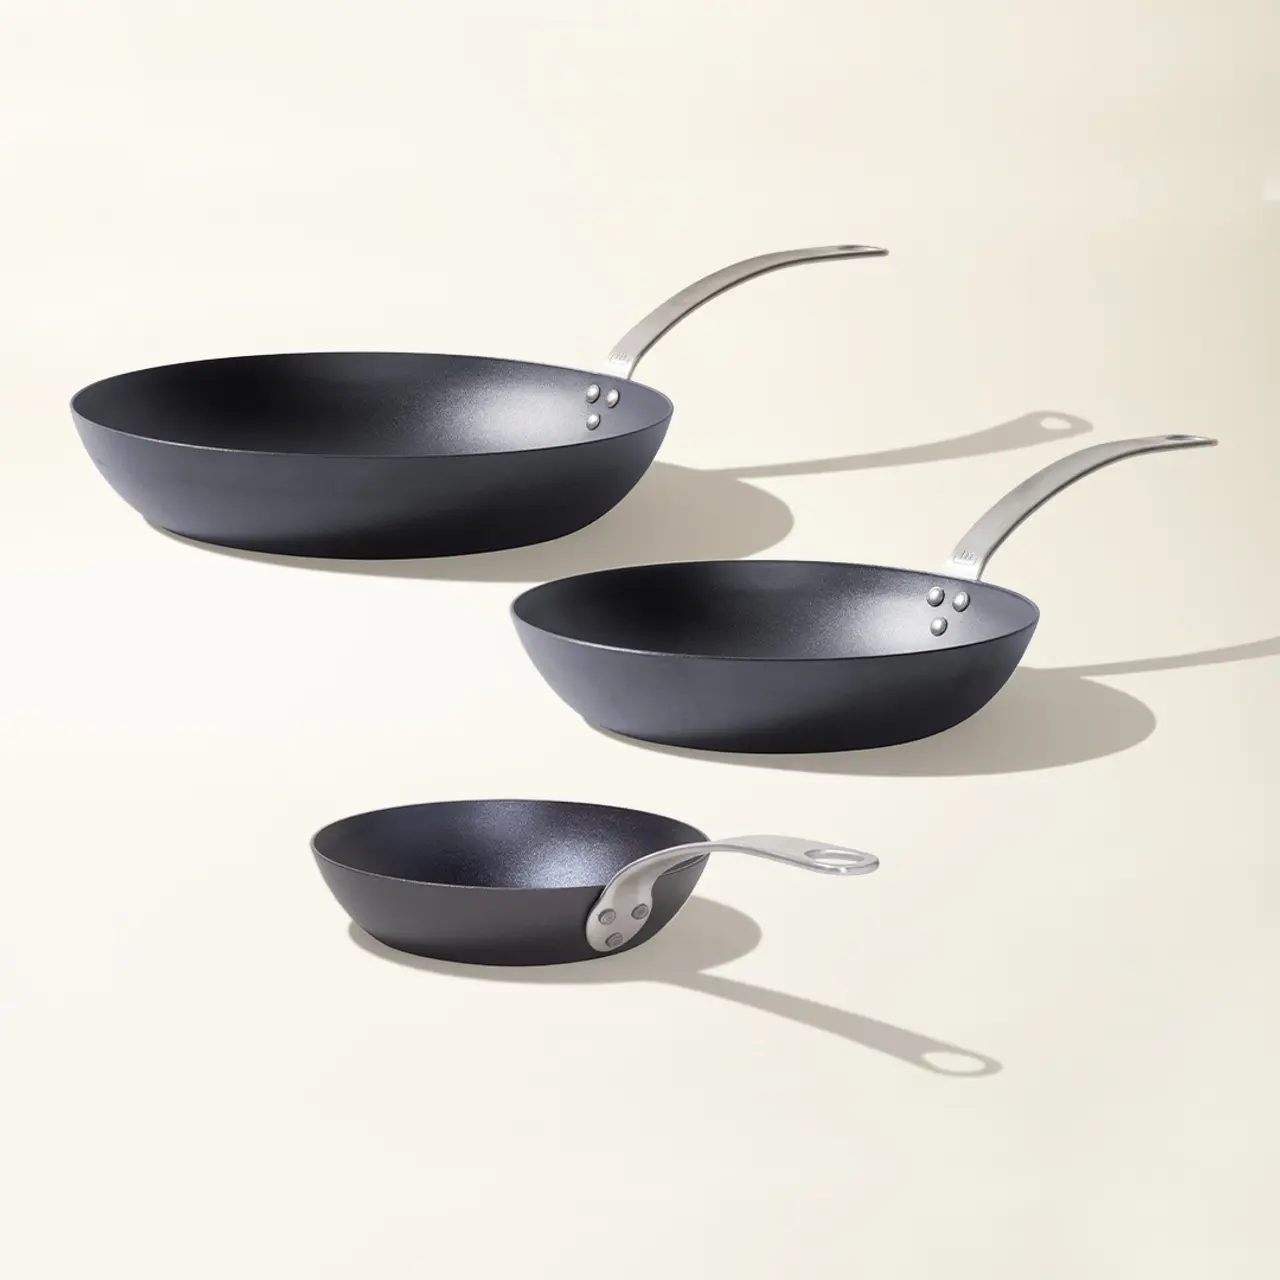 Three different-sized black frying pans are arranged in descending order with their shadows cast on a light background.